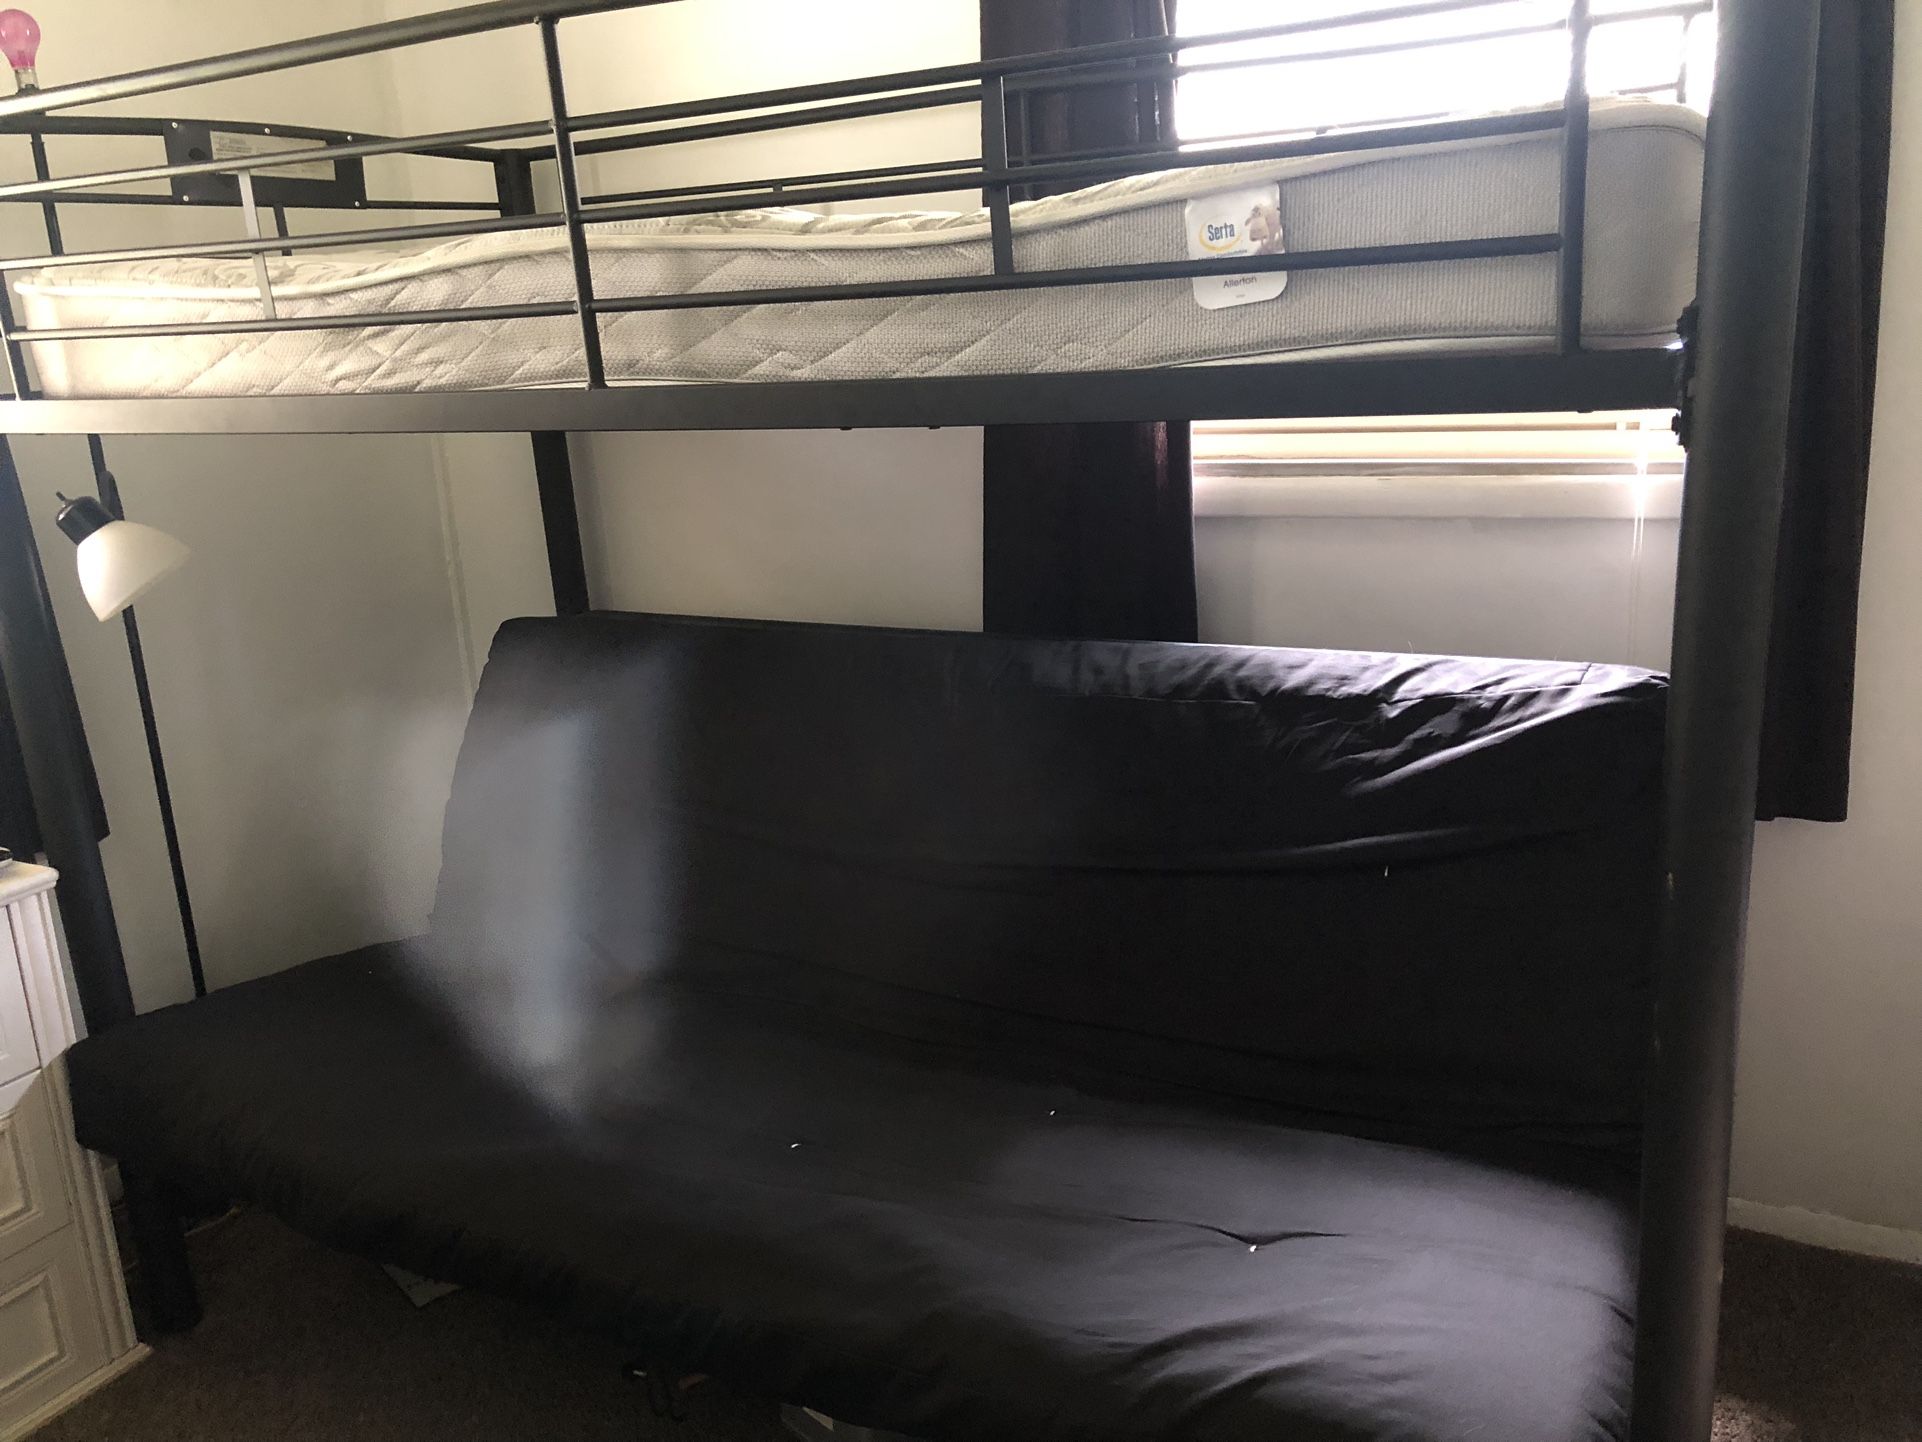 Bunk Bed With Futon 